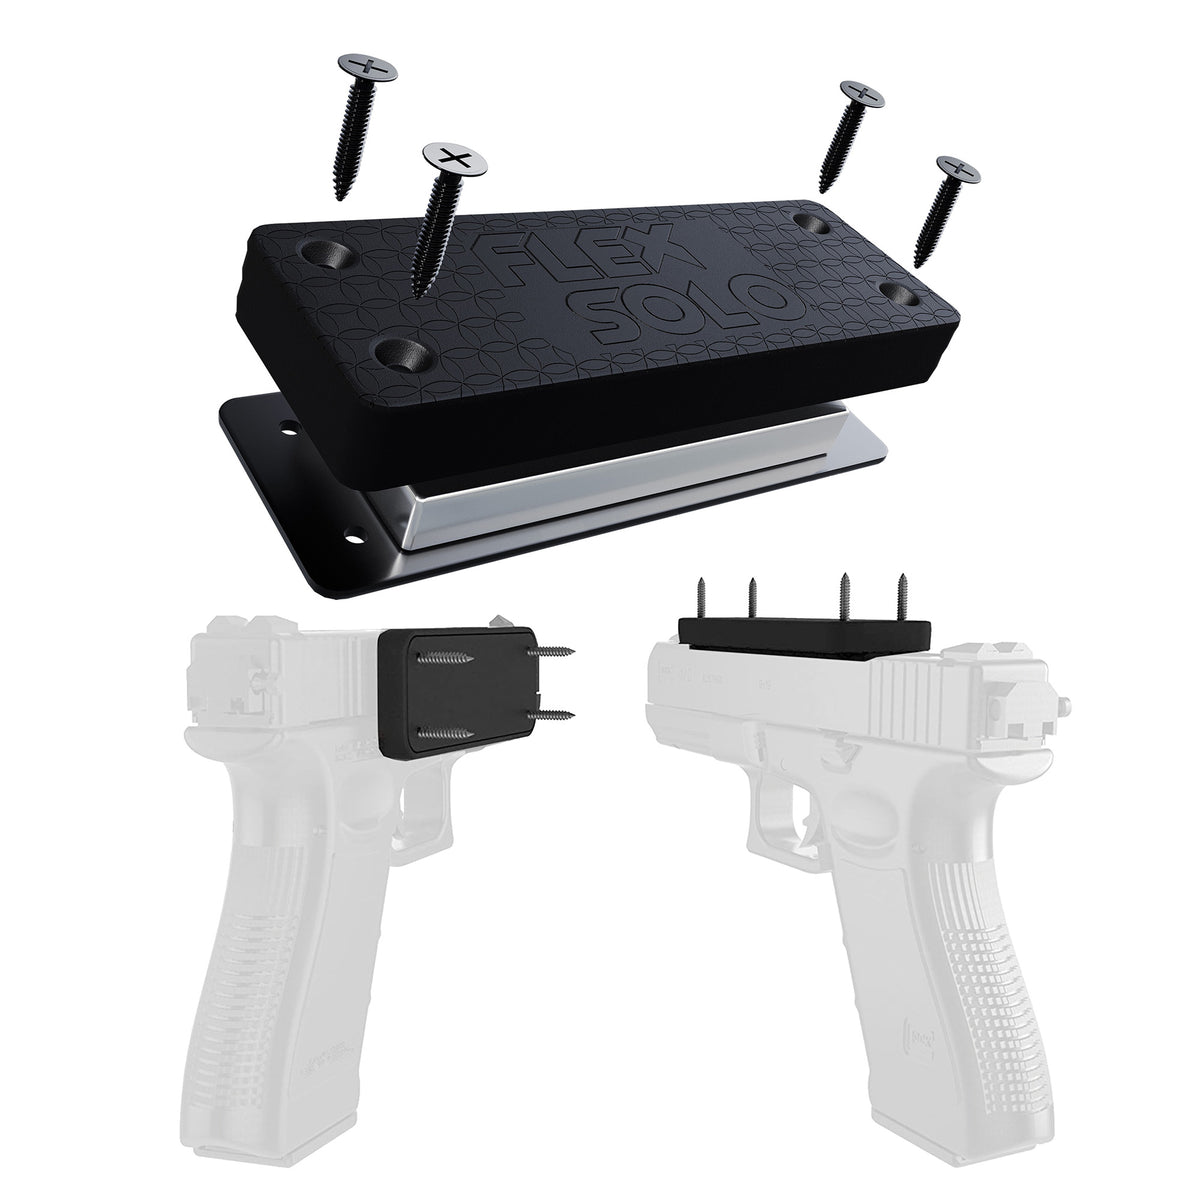 FlexSolo Gun Magnet Mount - Holds Up to 43 Pounds - Perfect for Cars, Gun Safes, Offices